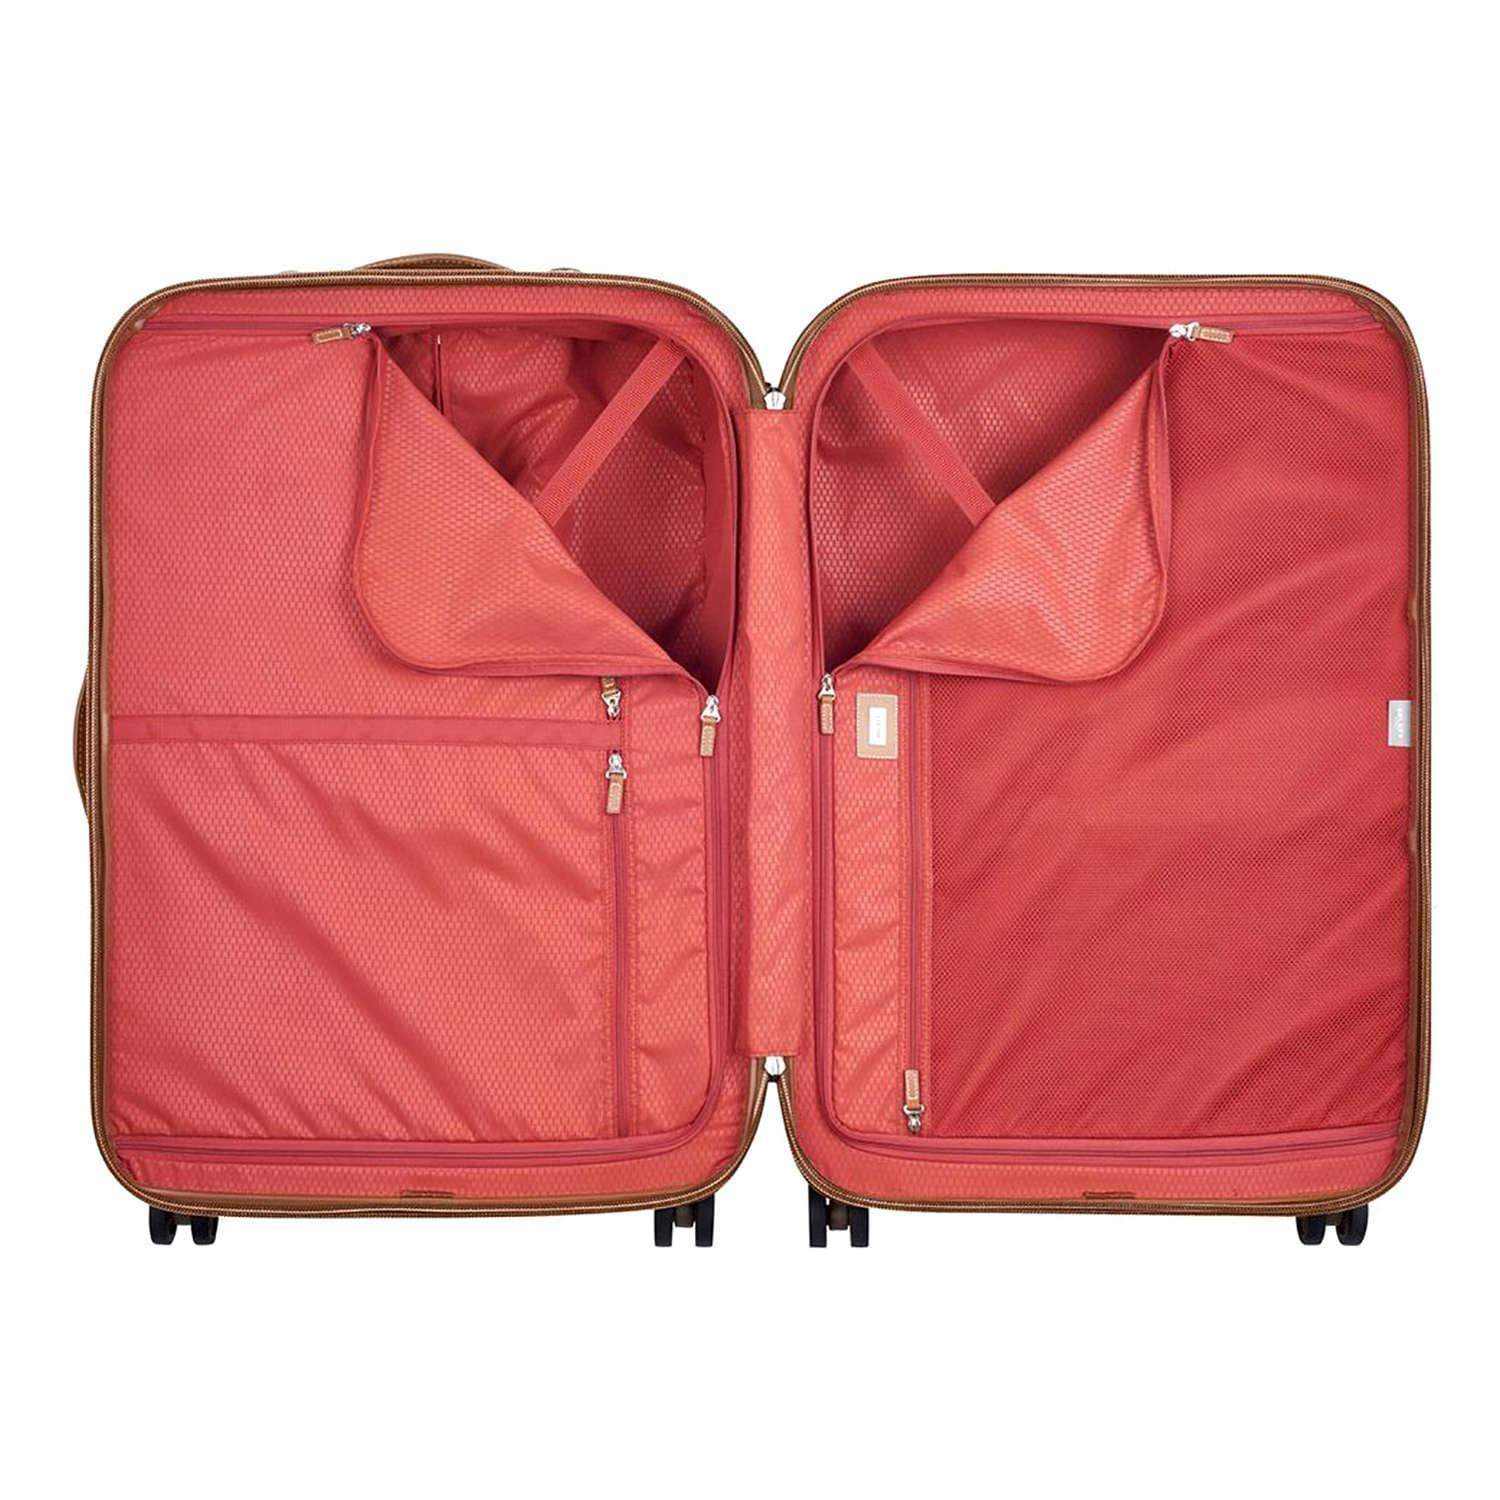 Delsey Chatelet Air 4 Double Wheel Cabin Trolley Case - Chocolate - 00167281006 CHOCOLATE - Jashanmal Home